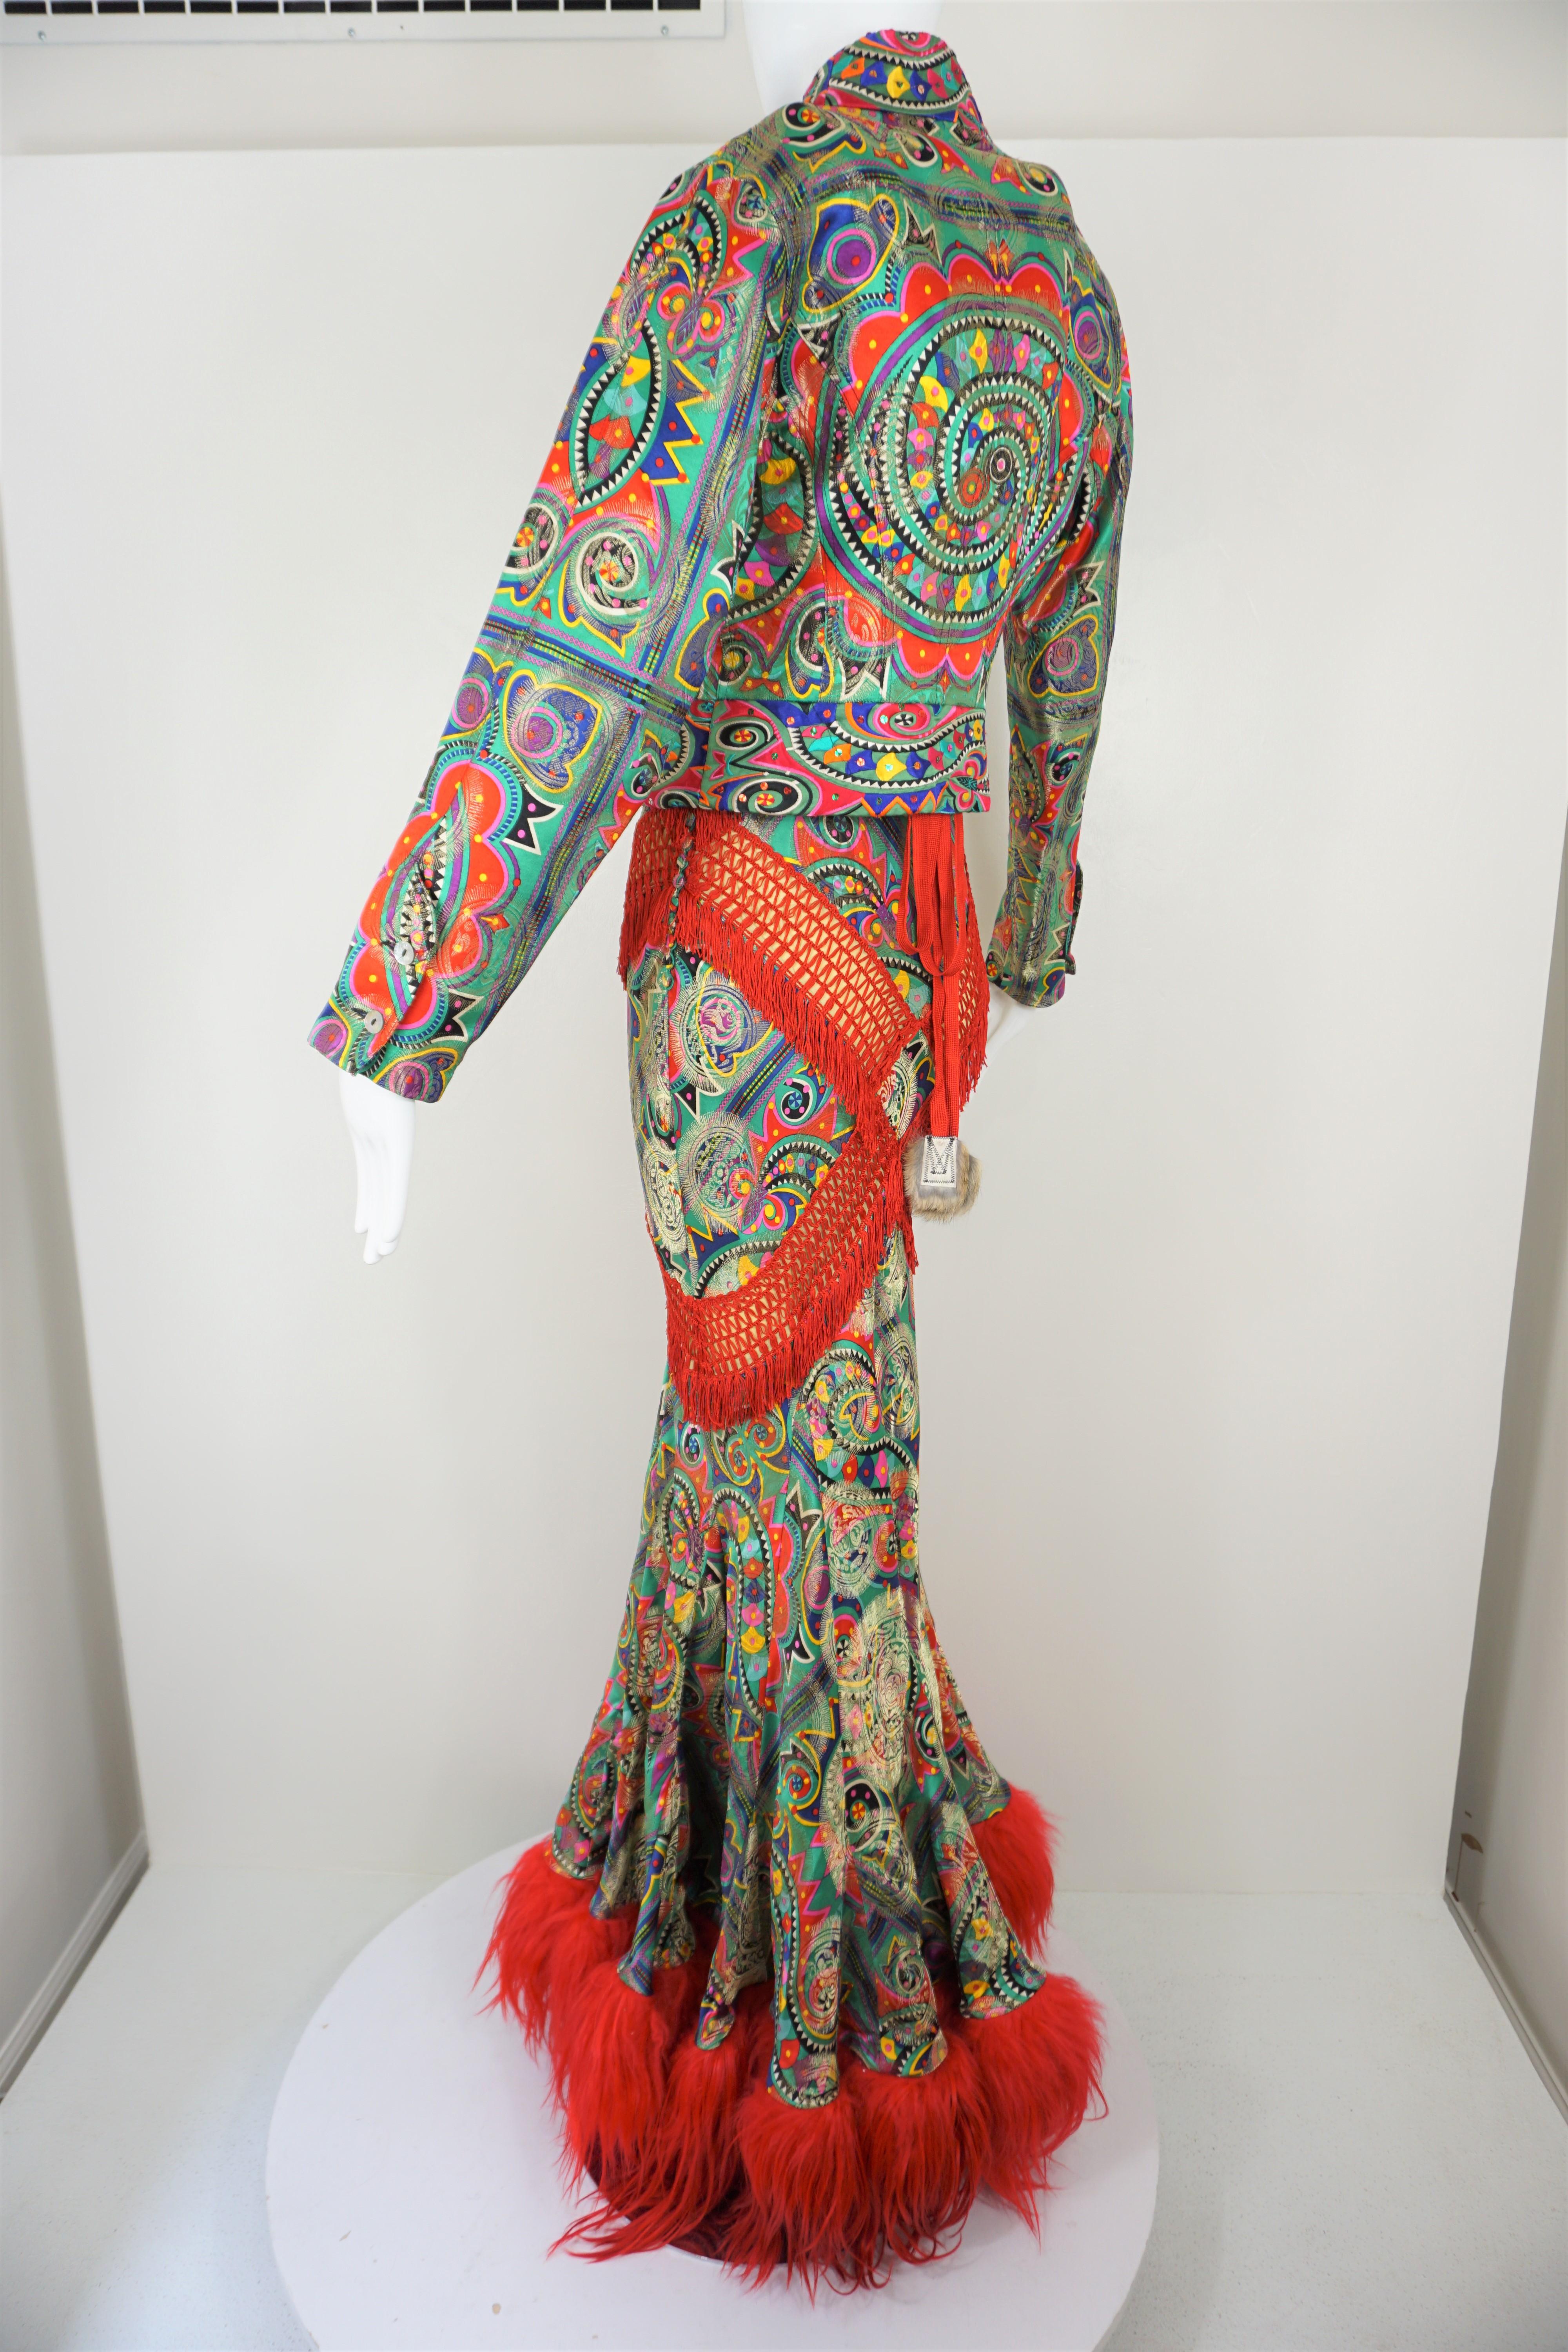 John Galliano Ethnographic Damask Print Runway Gown With Jacket Size 38/6, 2002 In New Condition For Sale In Carmel, CA